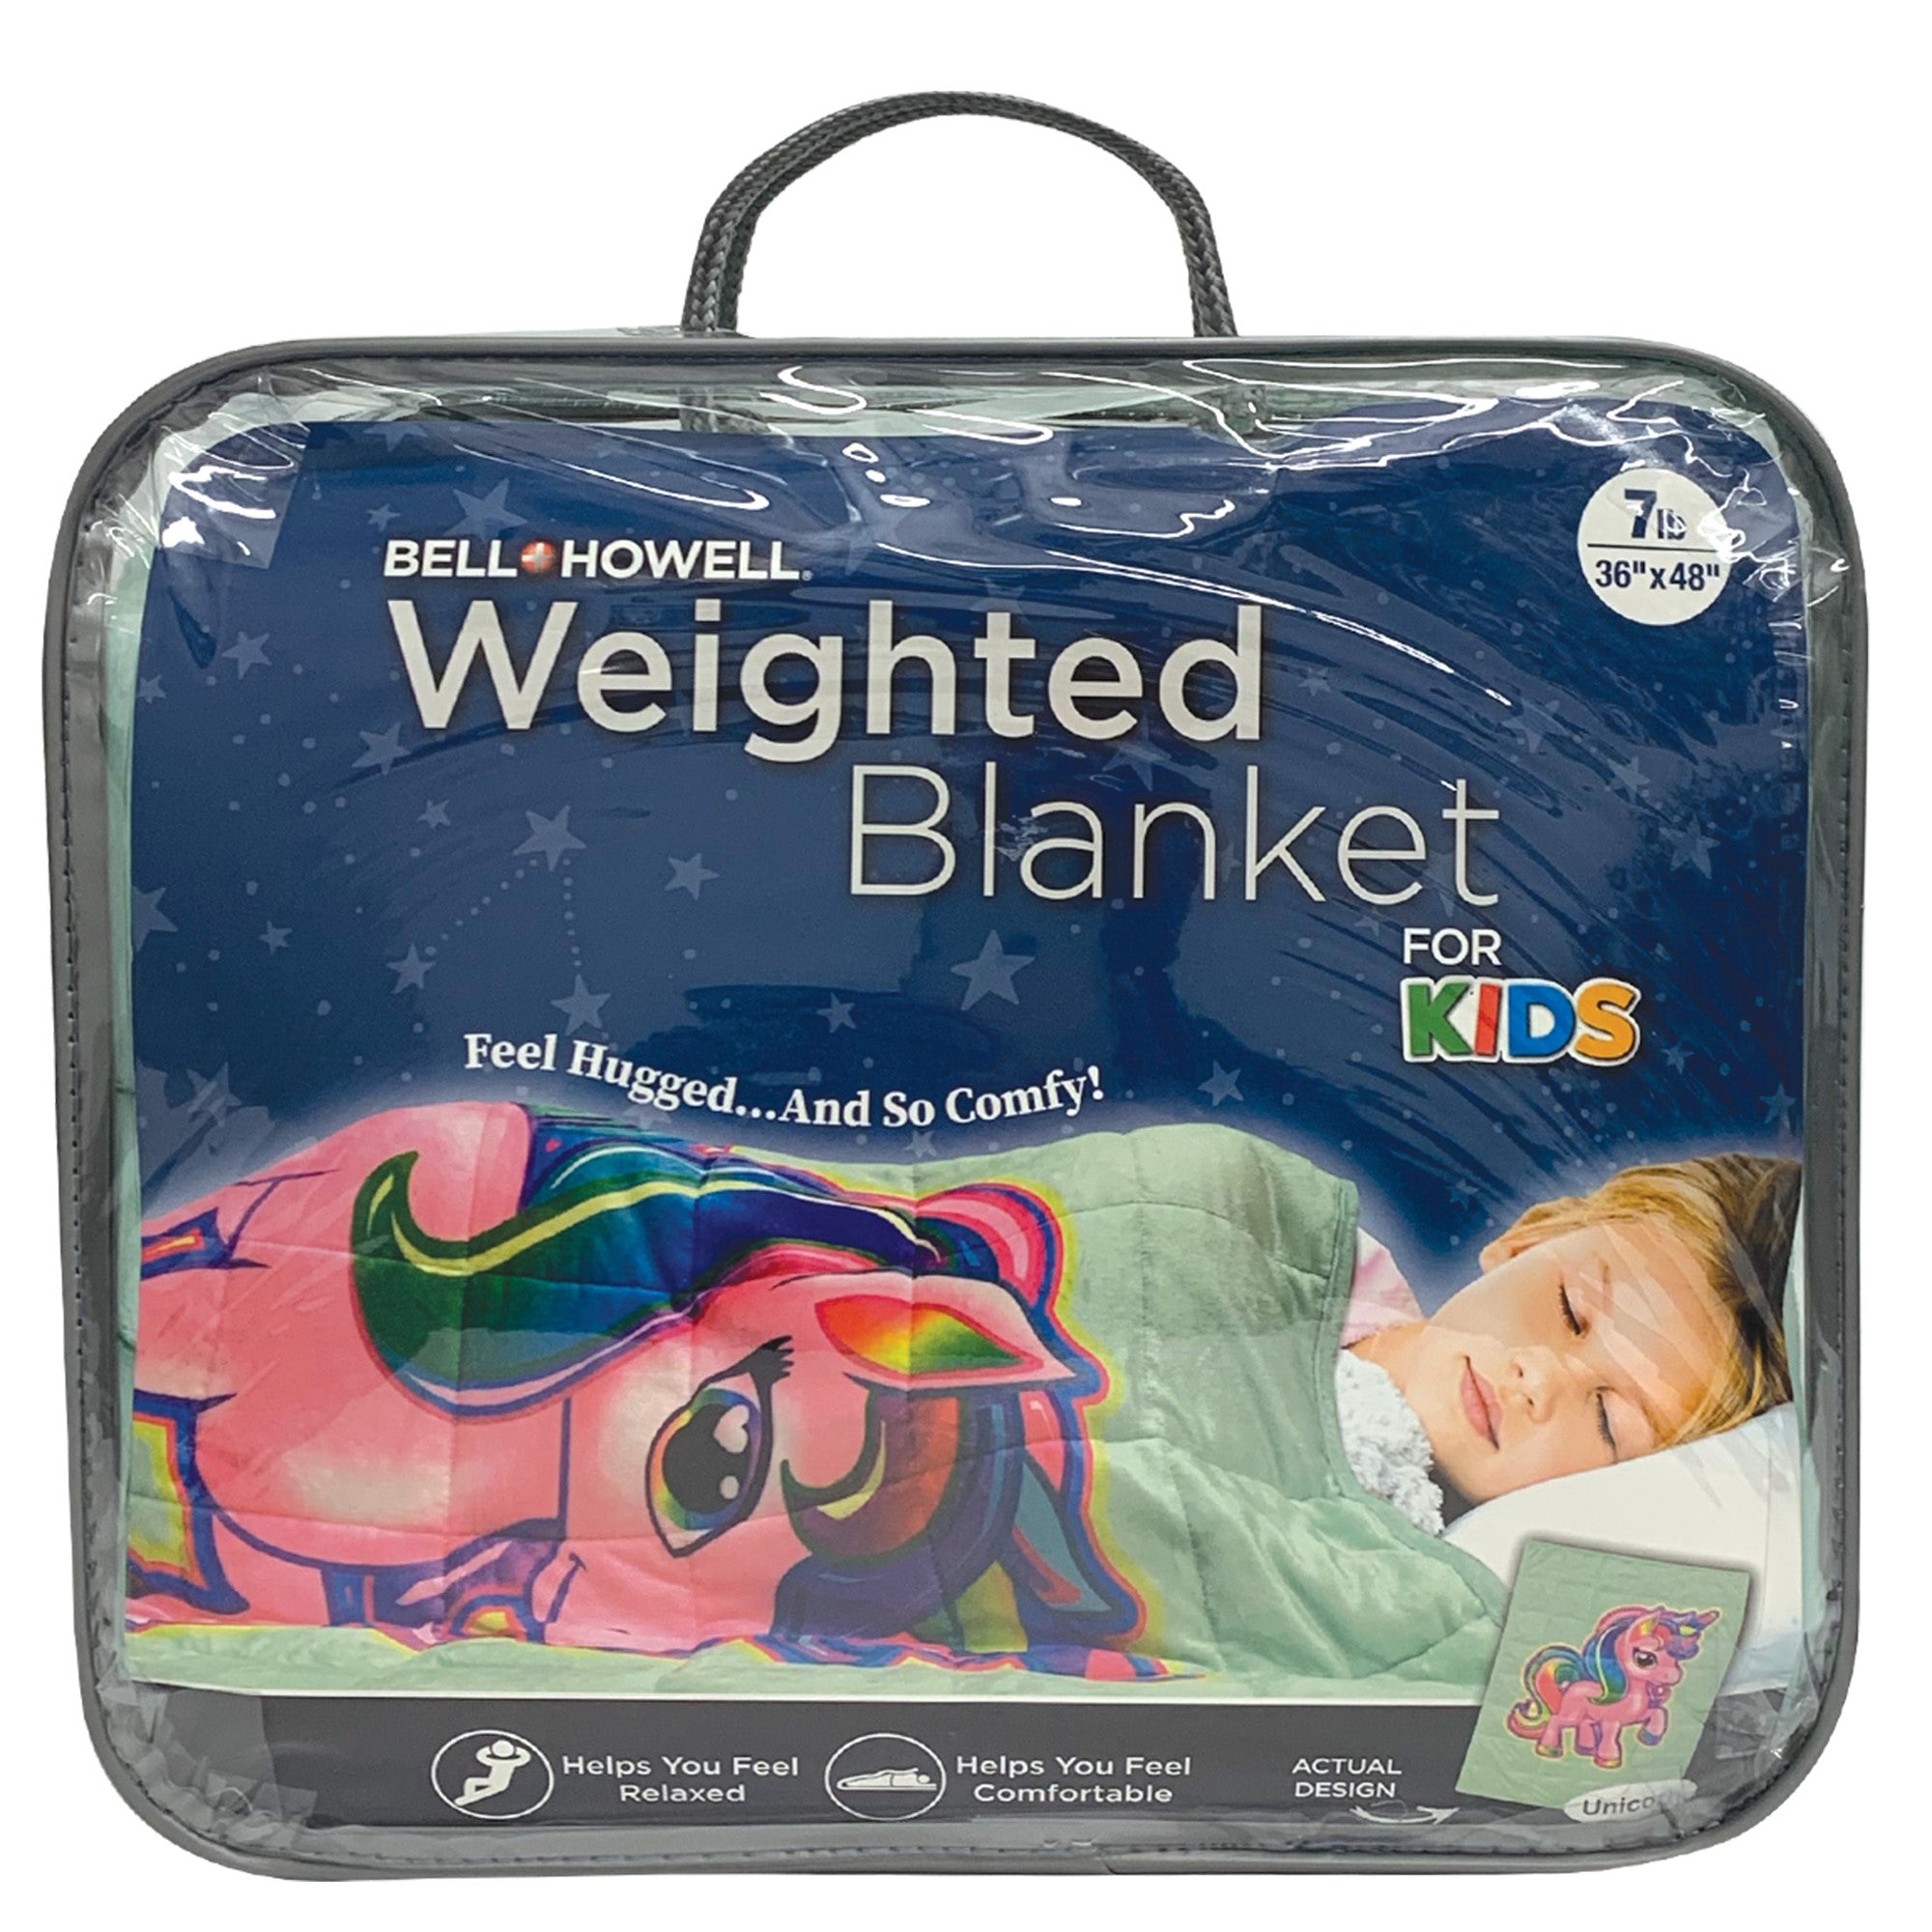 Bell + Howell Kids 7LB Weighted Blanket: A Soothing Embrace for Restful Sleep